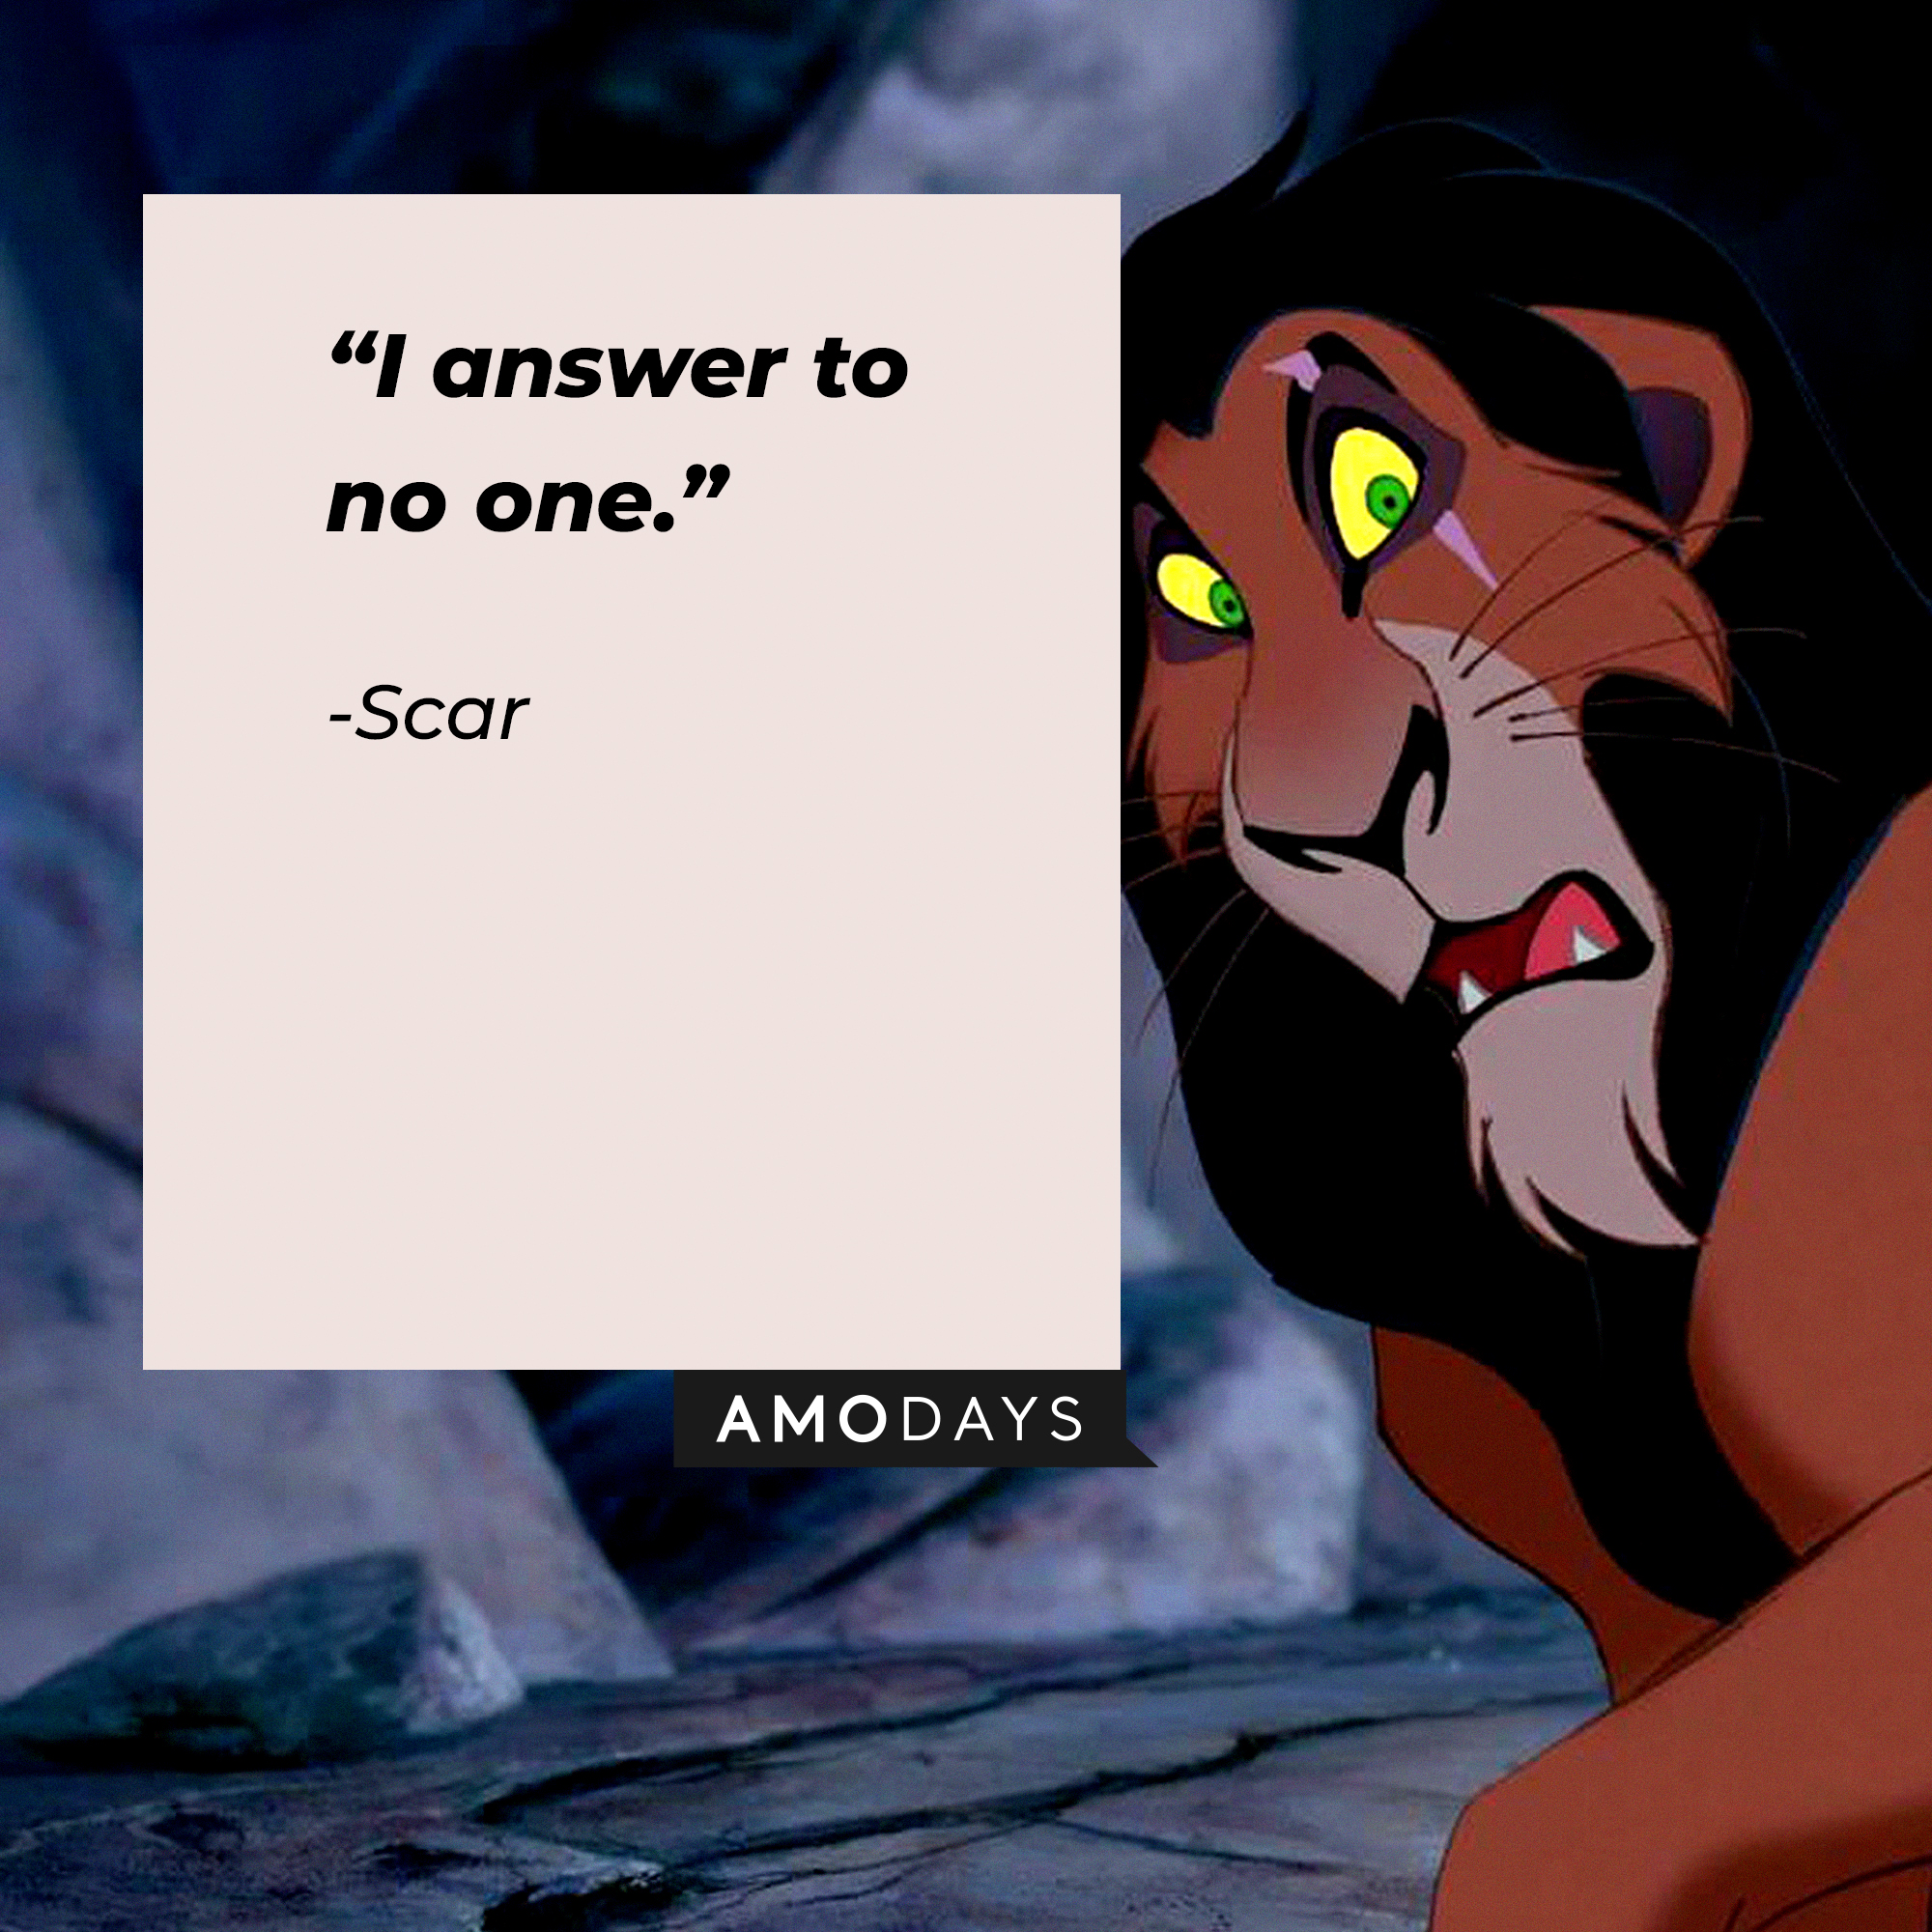 A photo of Scar with the quote, "I answer to no one." | Source: Facebook/DisneyTheLionKing